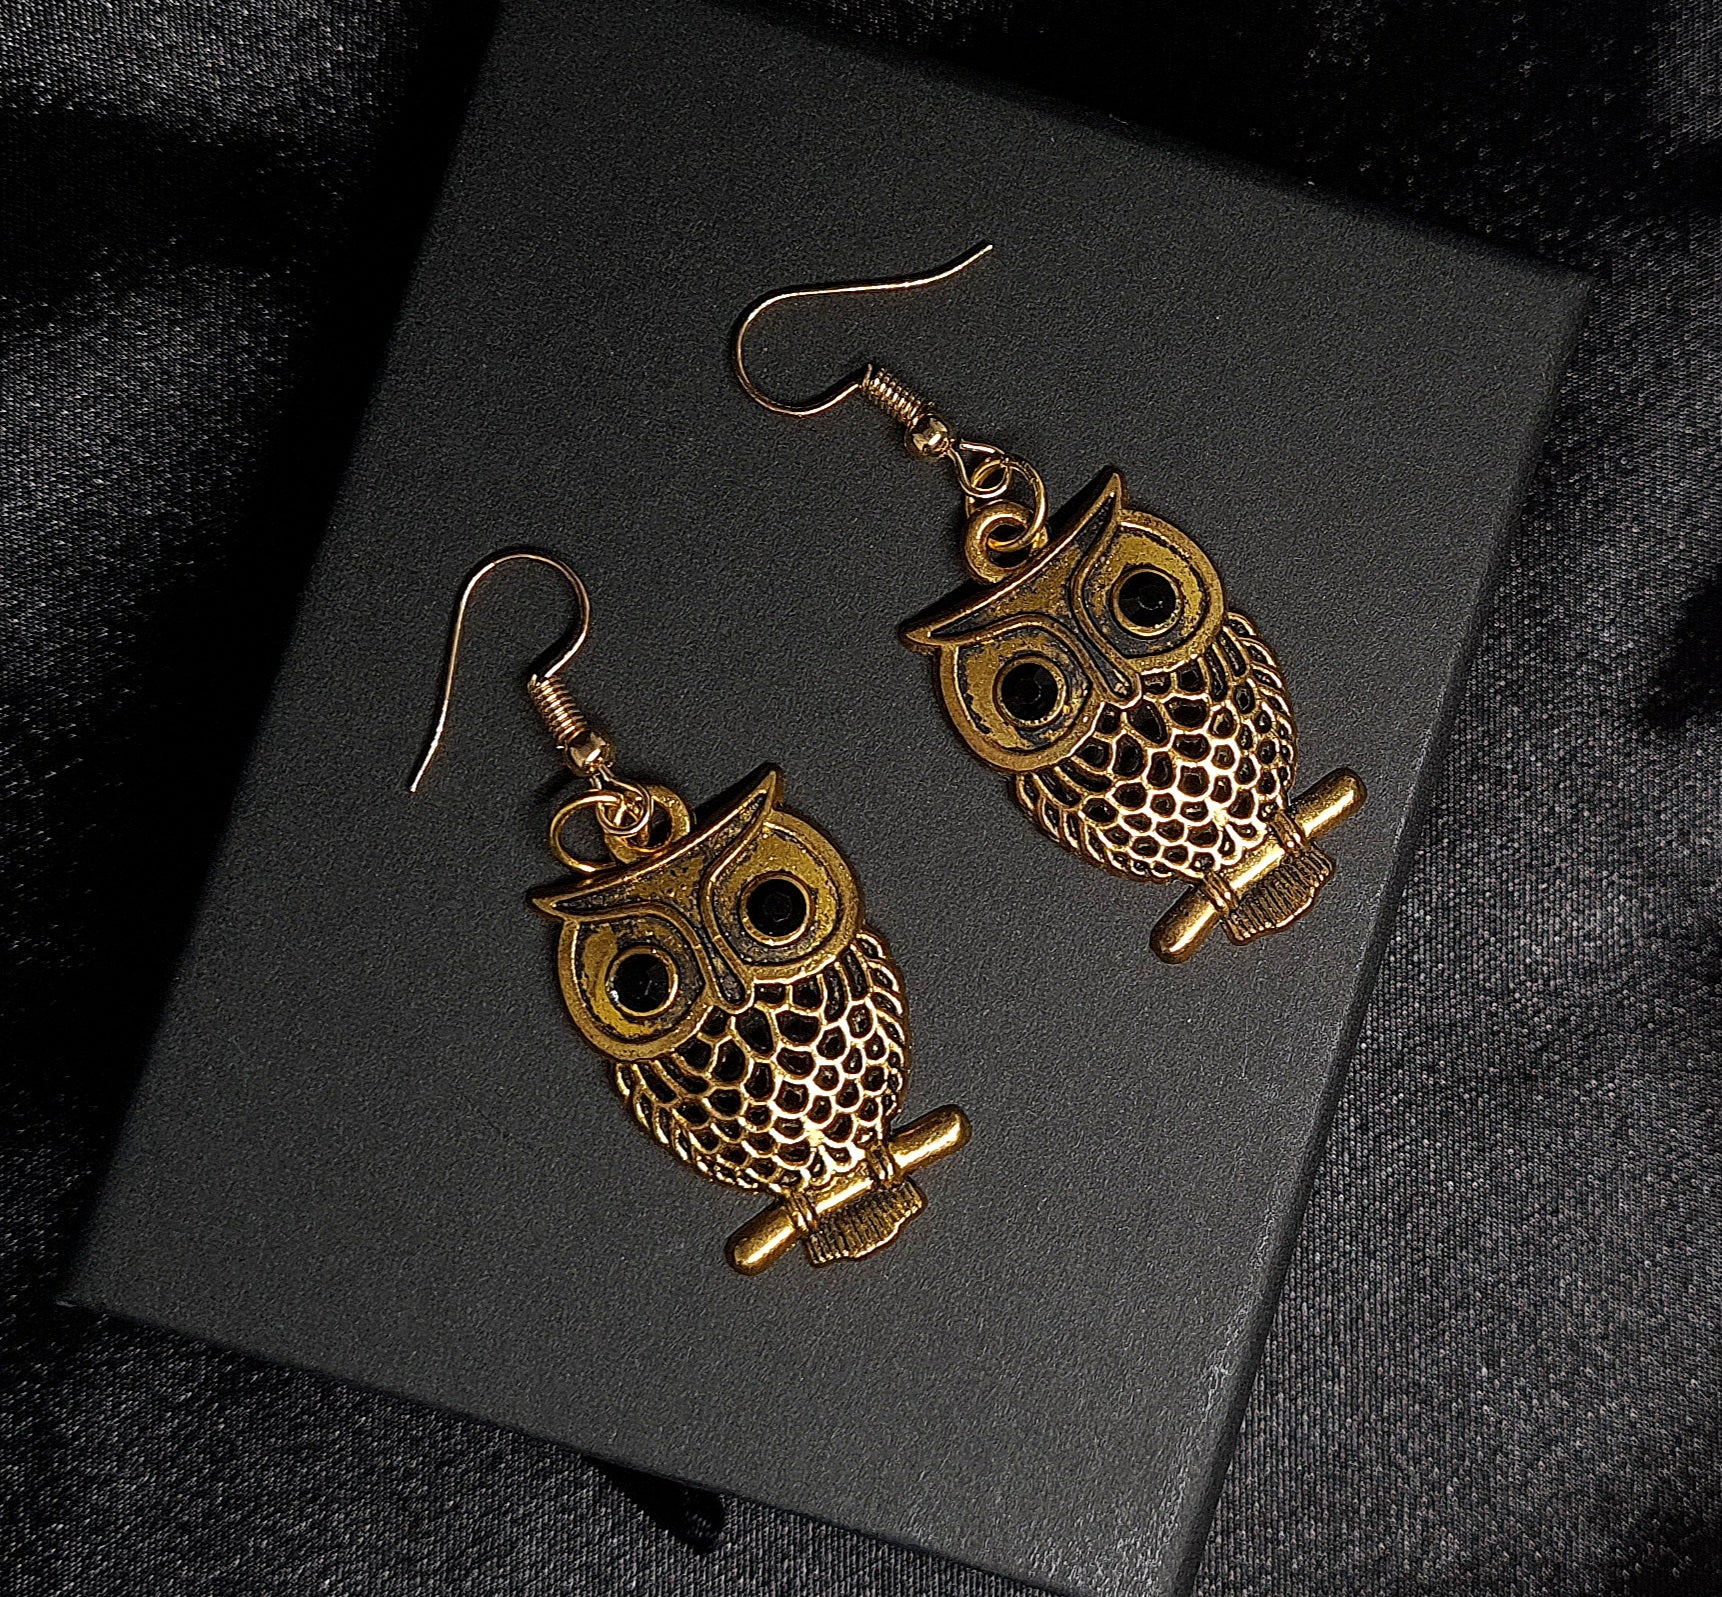 Astrid Earrings sparkling golden metal and adorable owl charm with exquisite details.